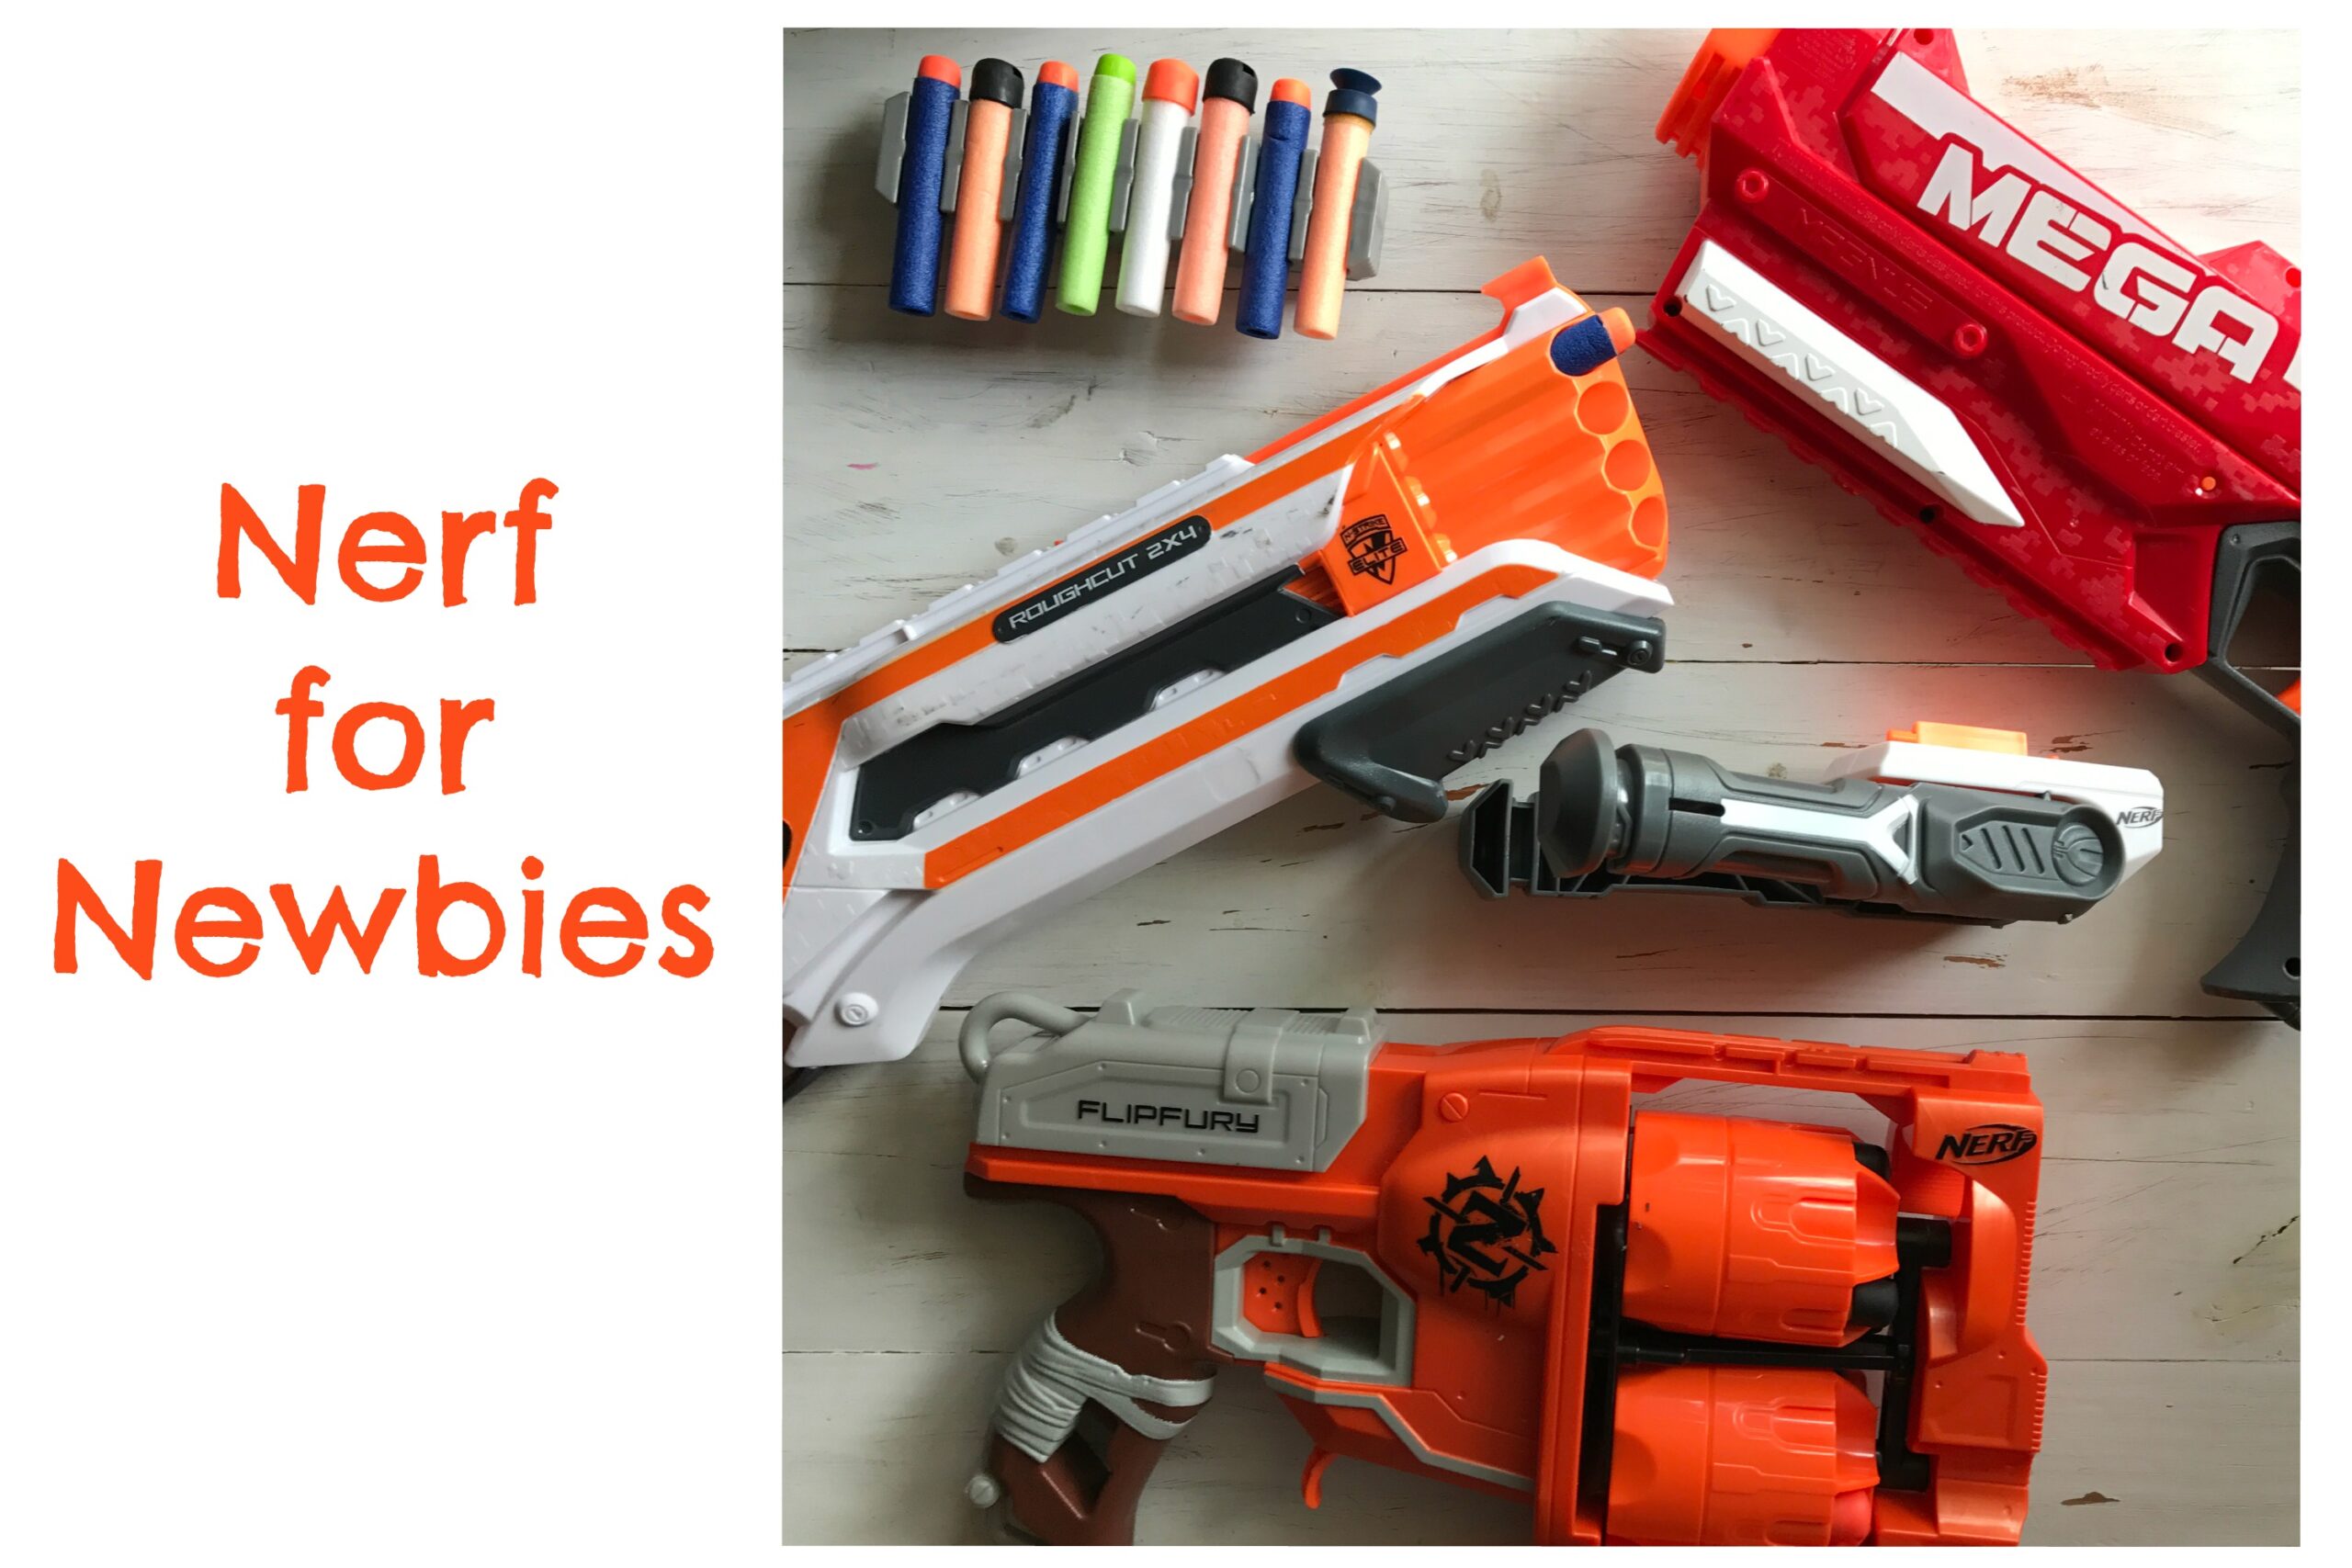 Nerf for Newbies | Always Moving Mommy | Not sure where to start when it comes to Nerf? These tips will help you get started!